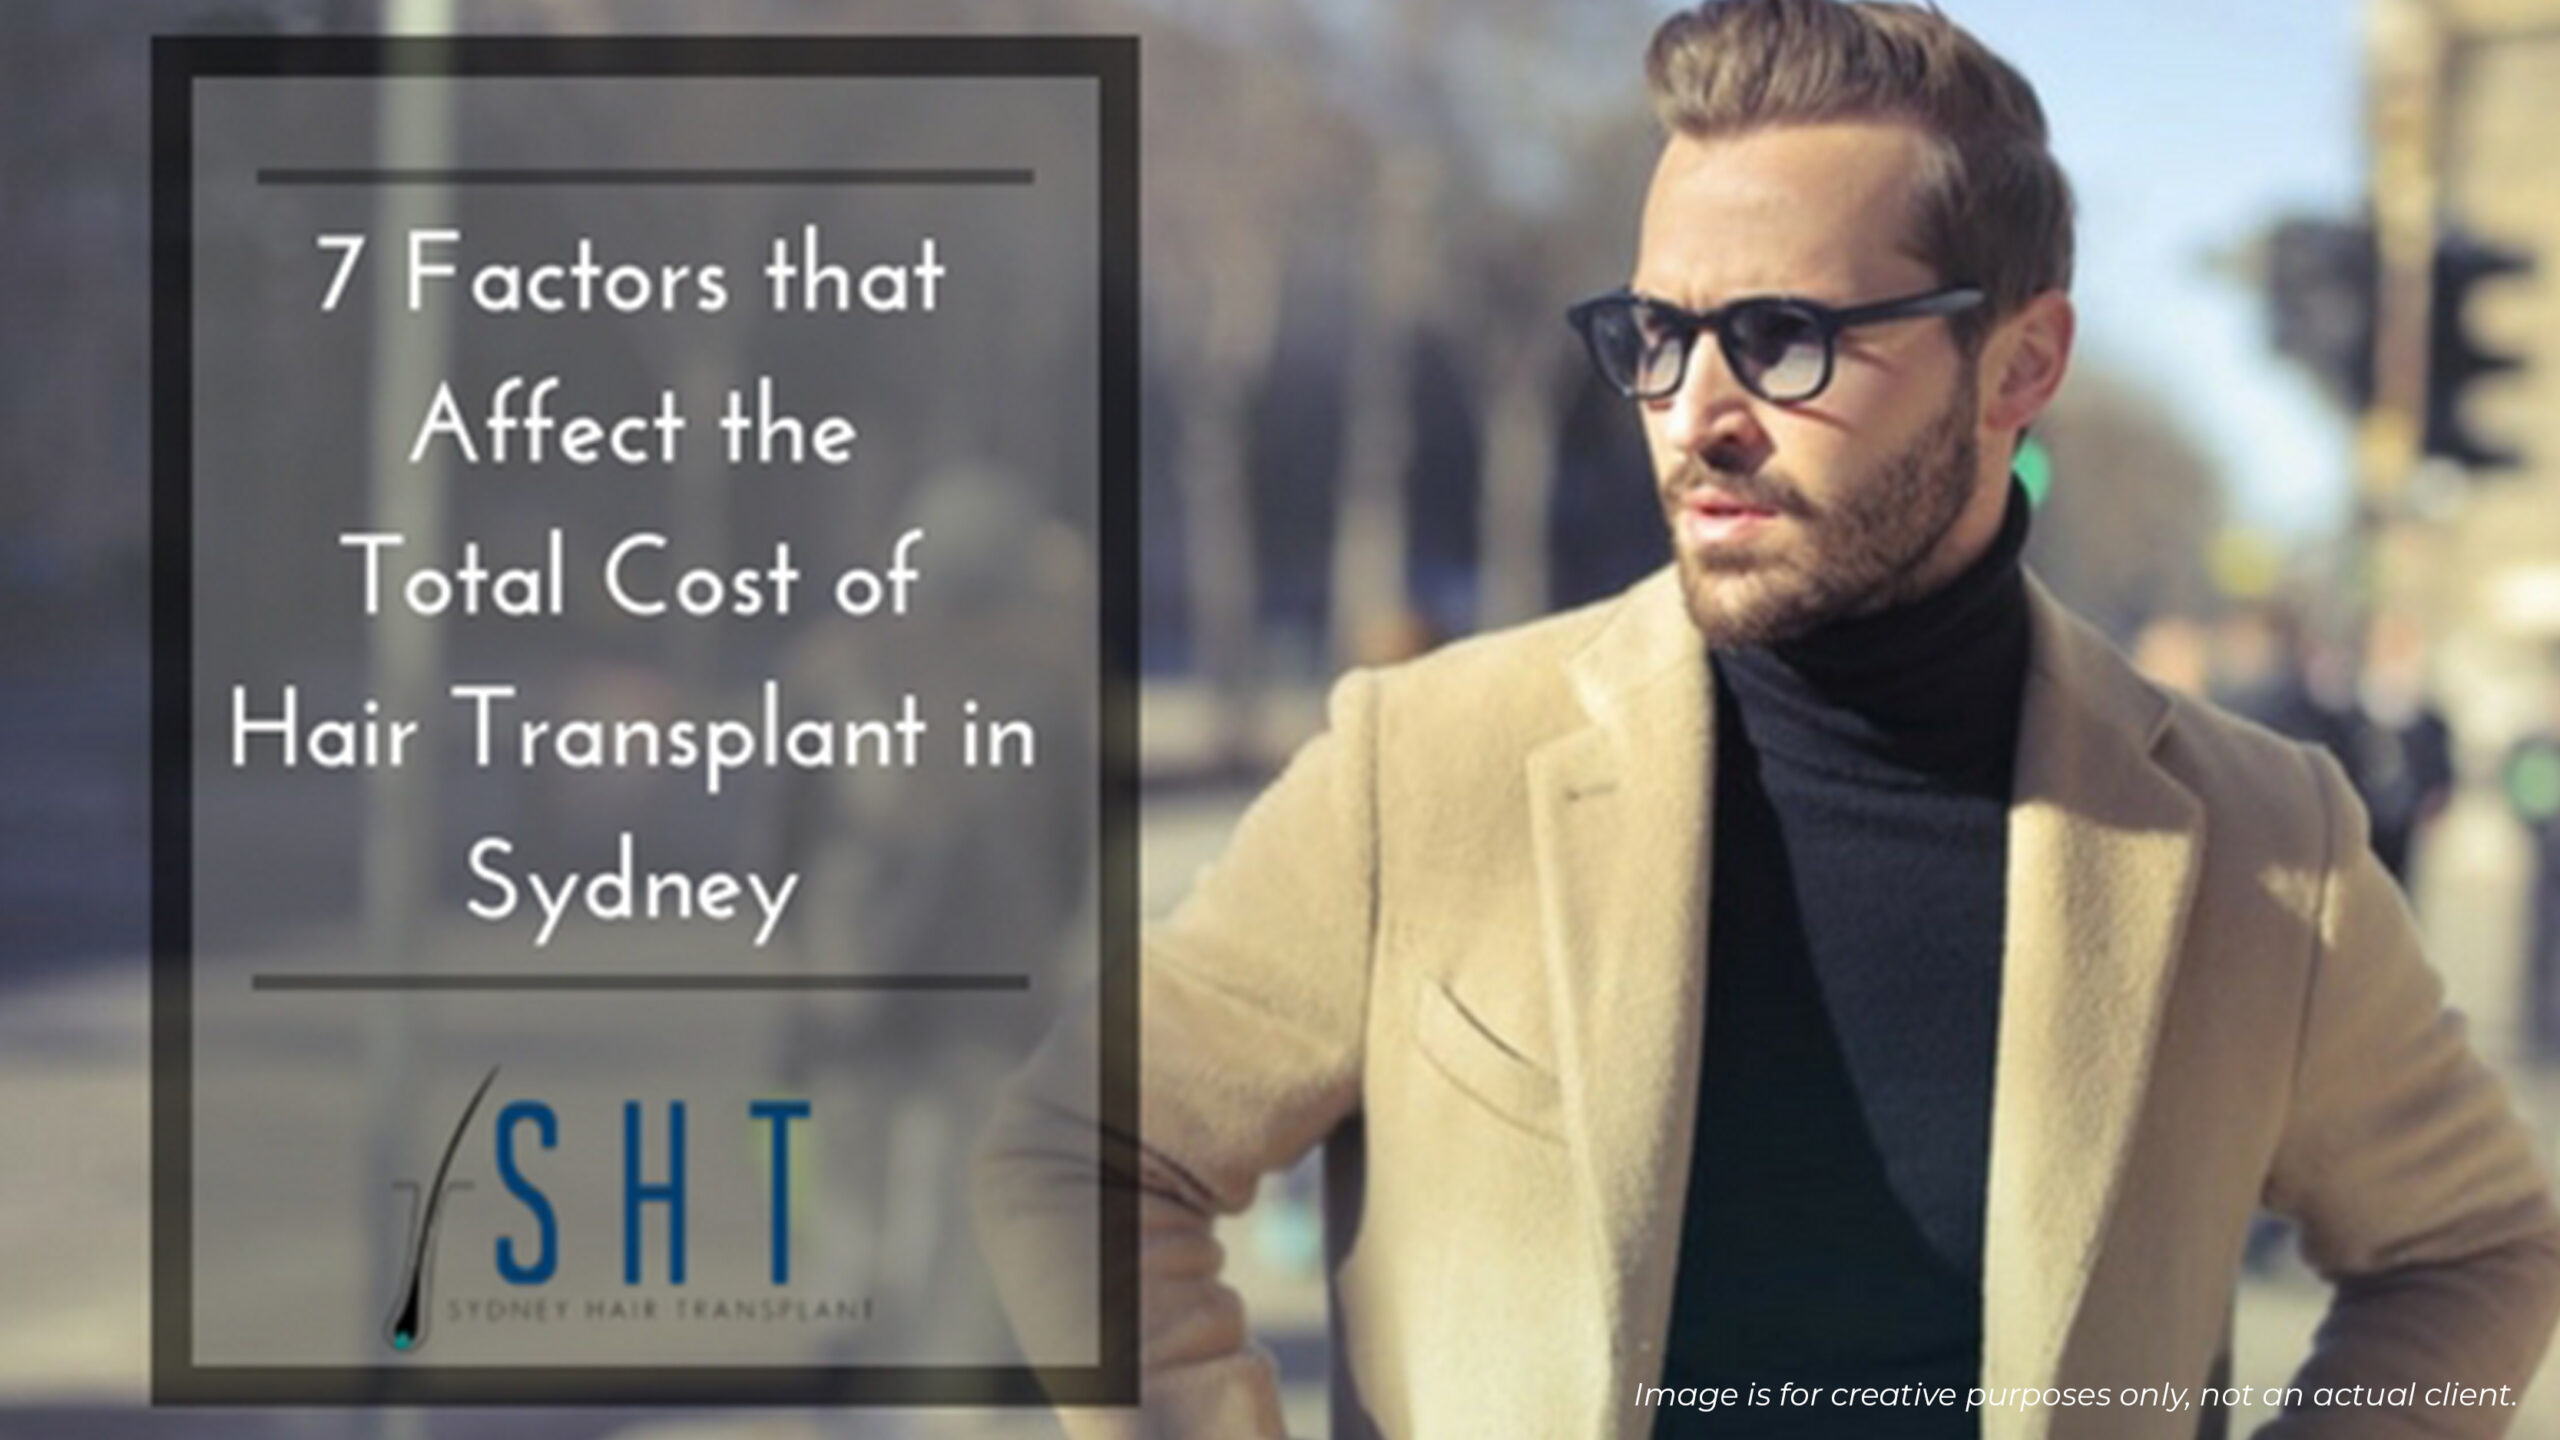 7 Factors that Affect the Total Cost of Hair Transplant in Sydney